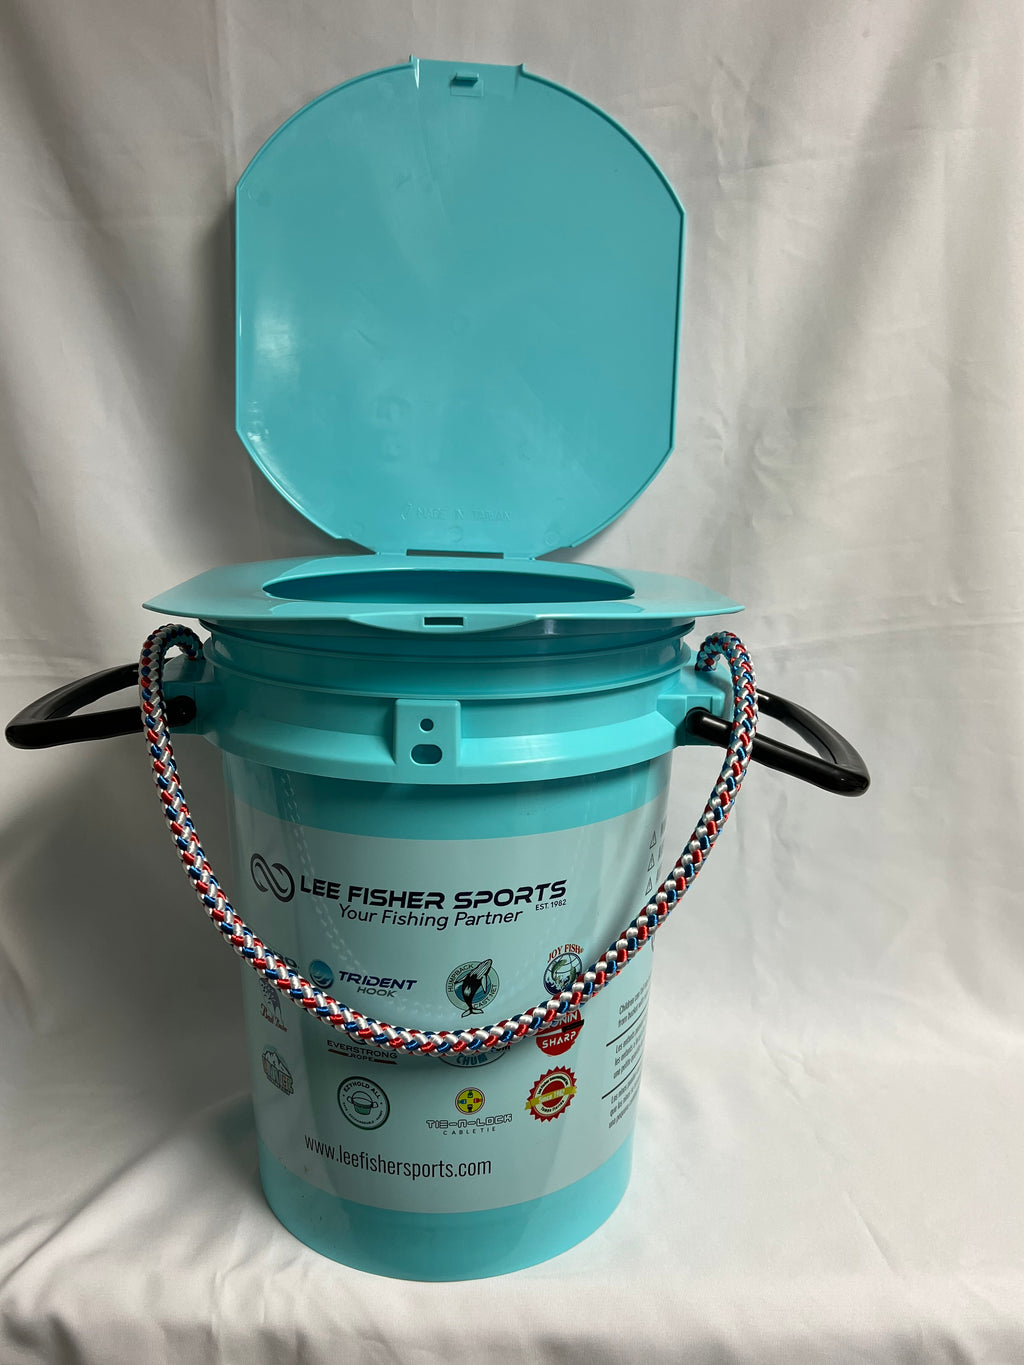 ISMART Portable Toilet -Great for fishing, boating, camping and outdoor  activities